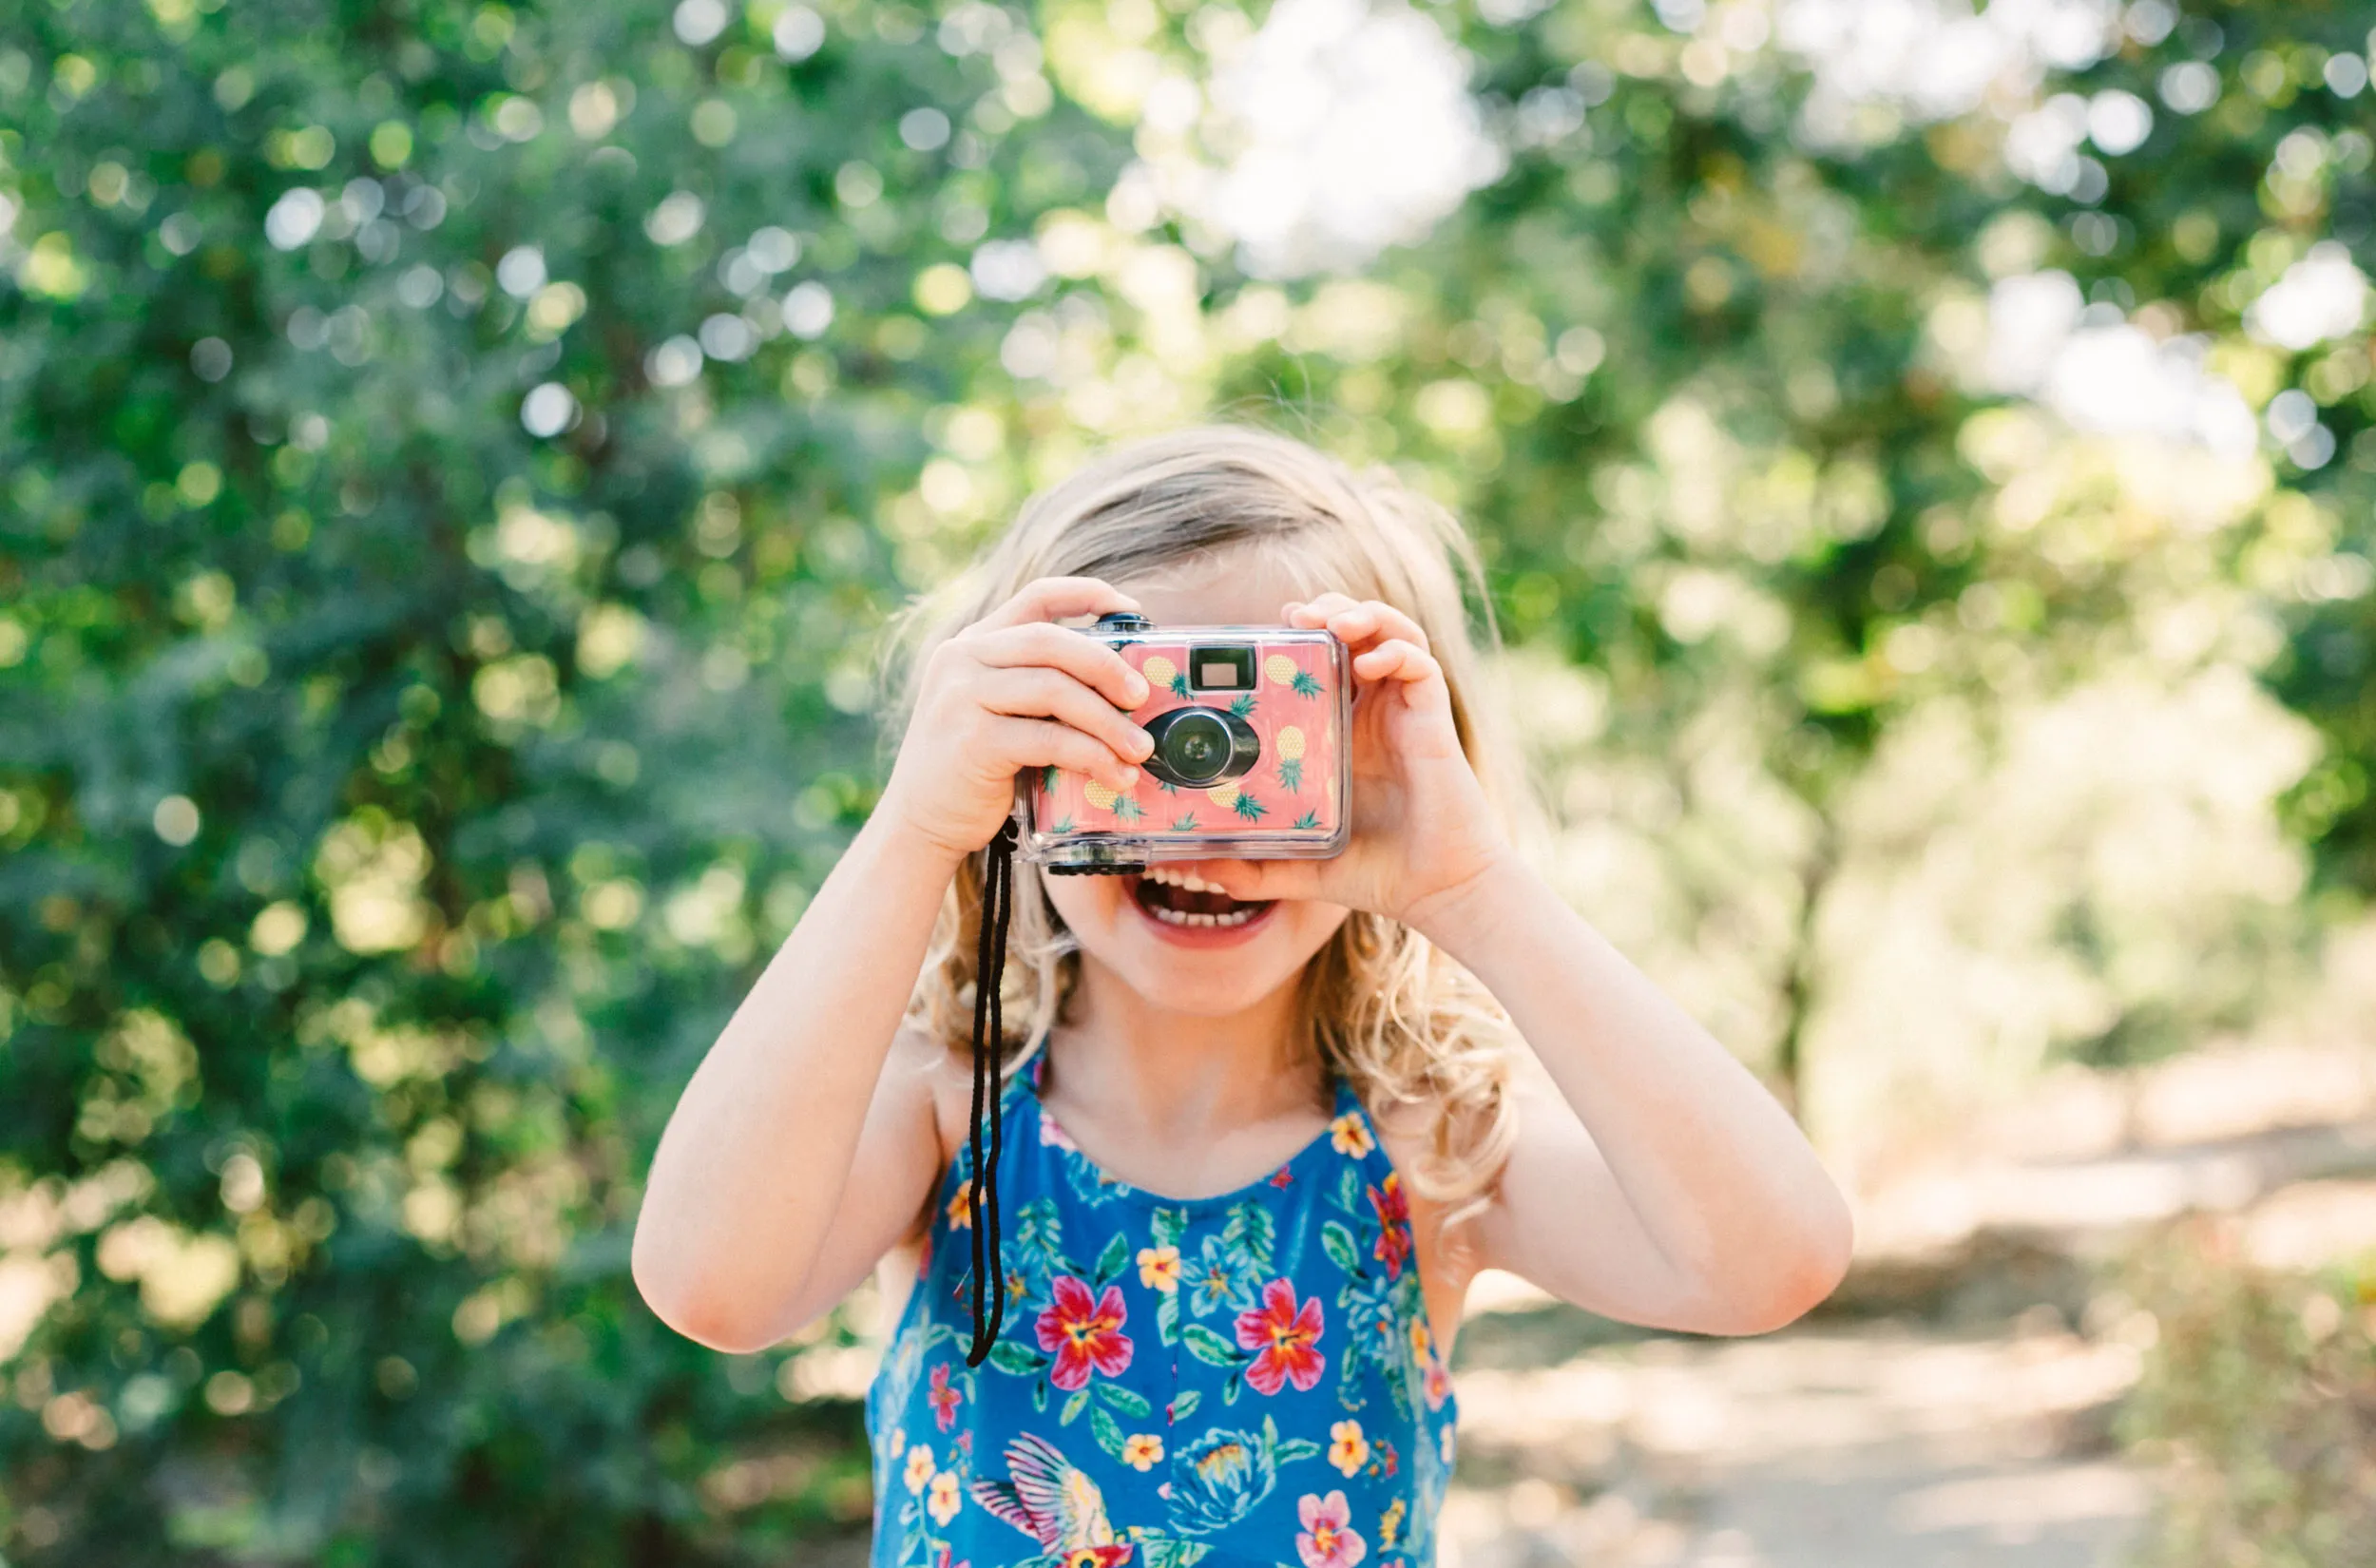 A small child stood on a path in a woodland, looking through a camera to take a picture.